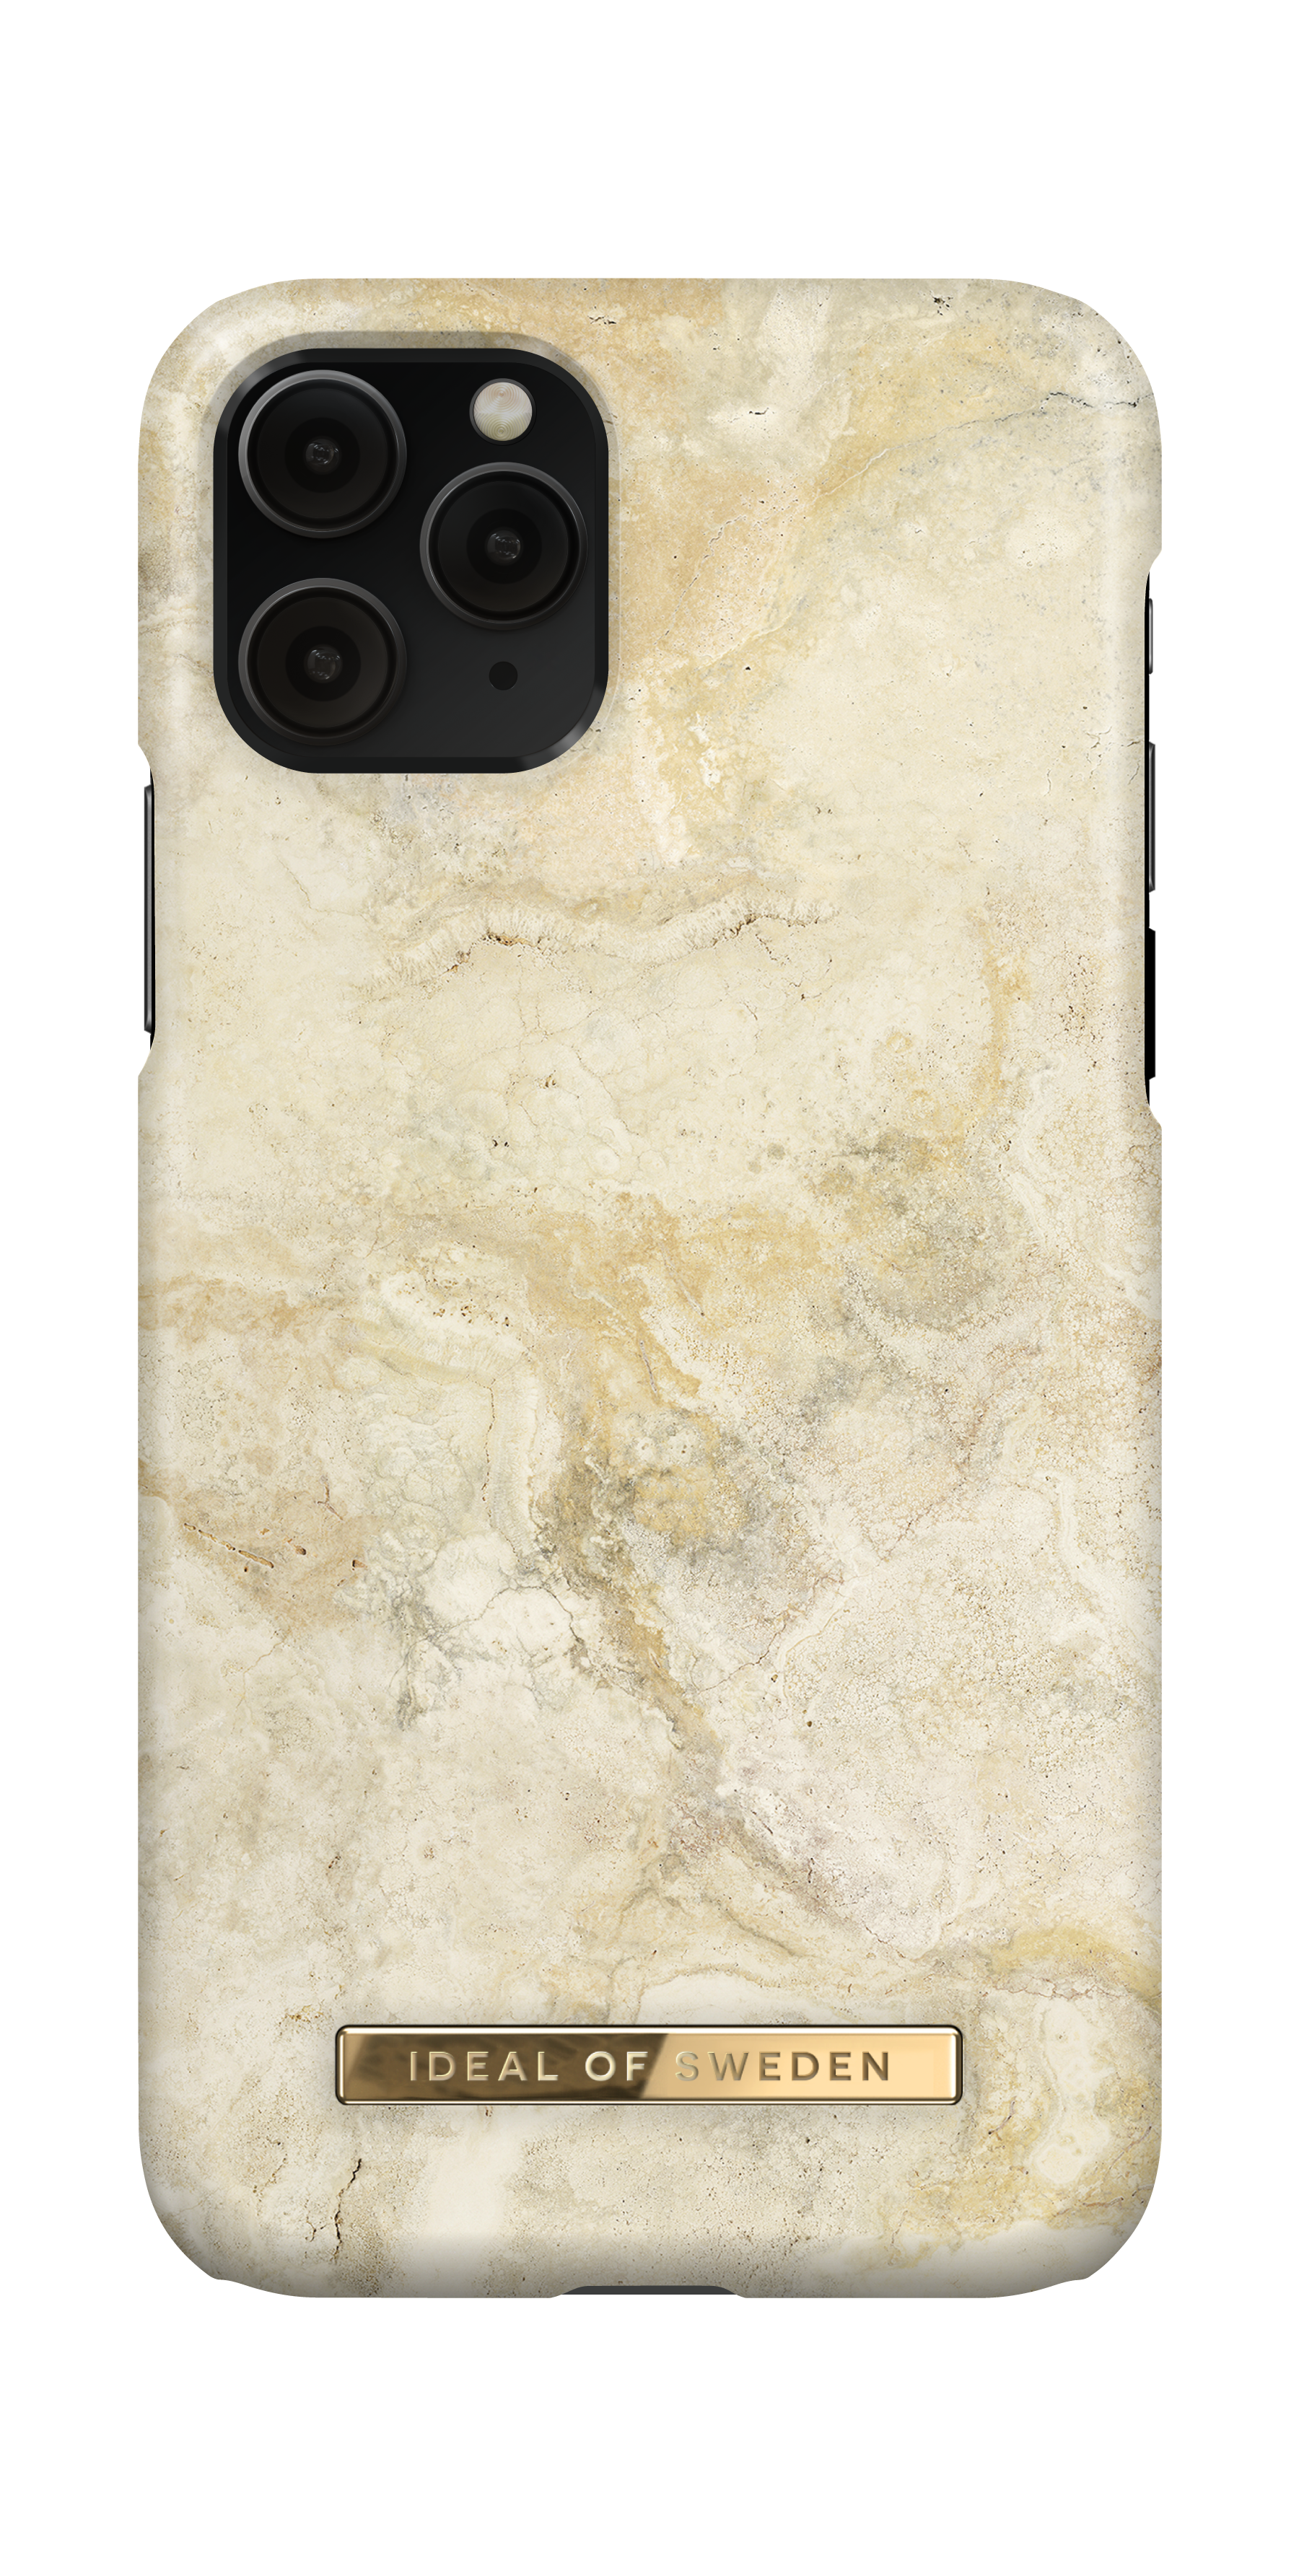 iPhone IDEAL Backcover, X, iPhone XS, Pro, Marble IDFCSS20-I1958-195, iPhone Sandstorm Apple, SWEDEN 11 OF